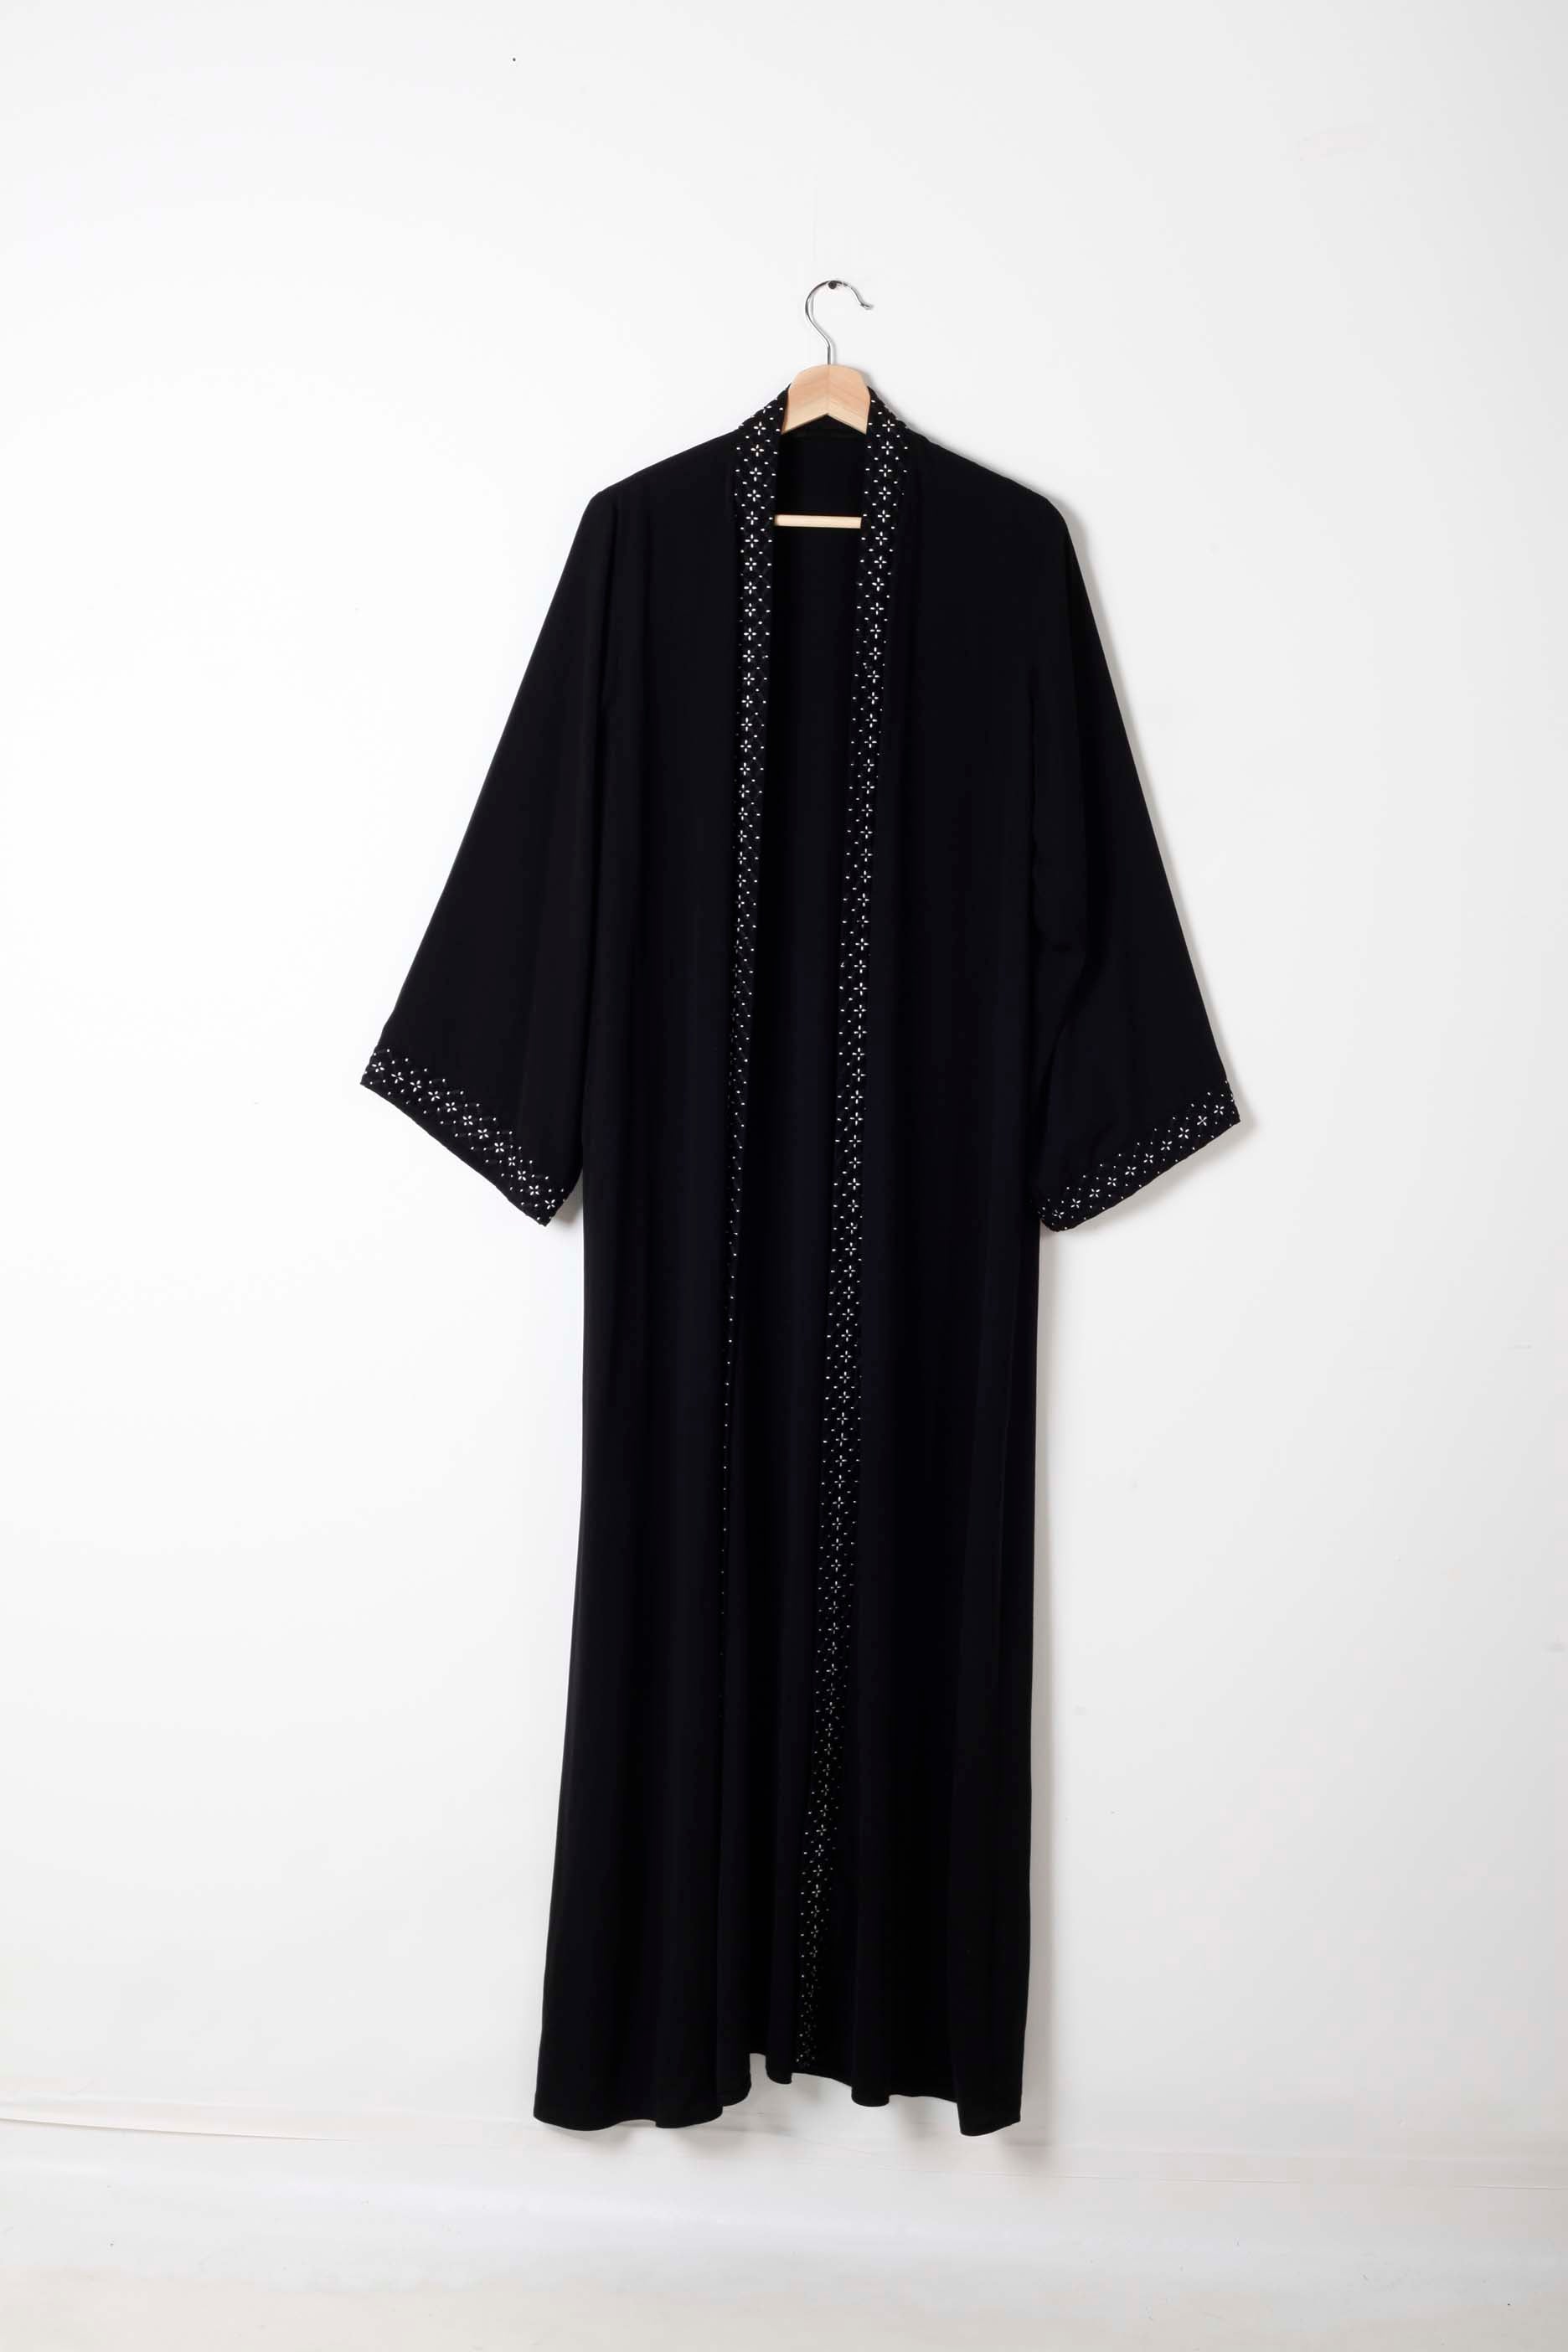 Black Abaya with White Embroidery Flowers